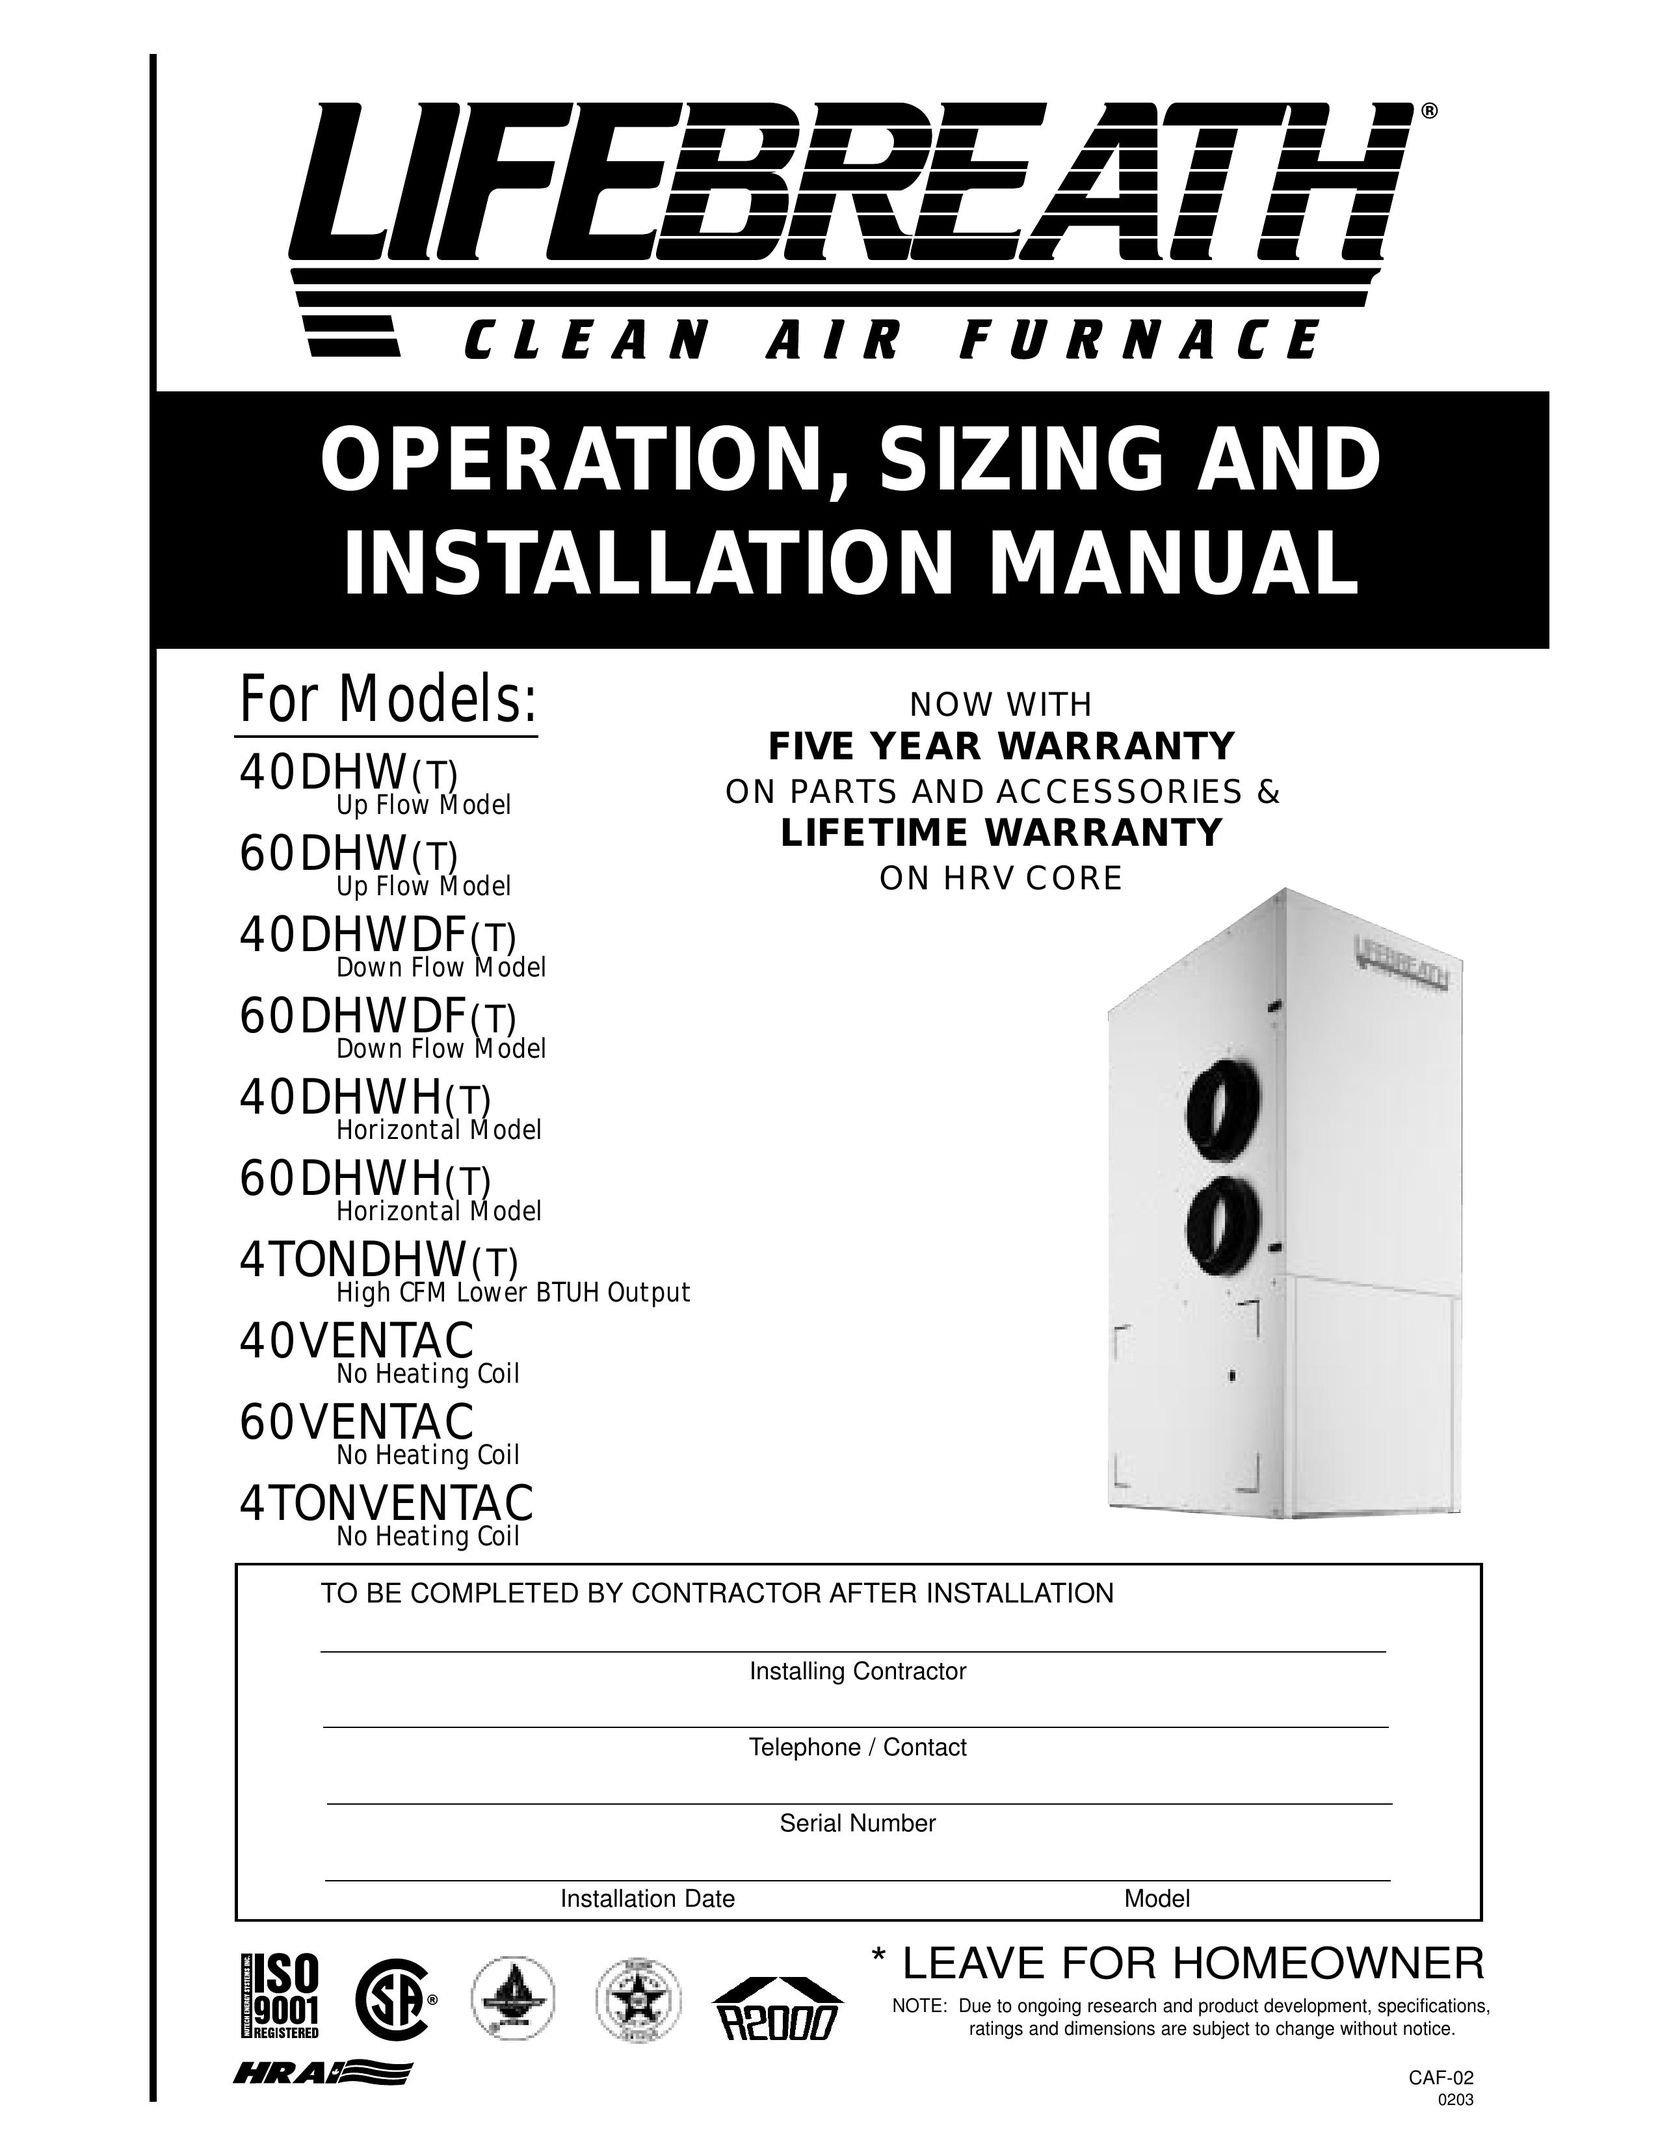 Lifebreath 40DHW(T) Thermostat User Manual